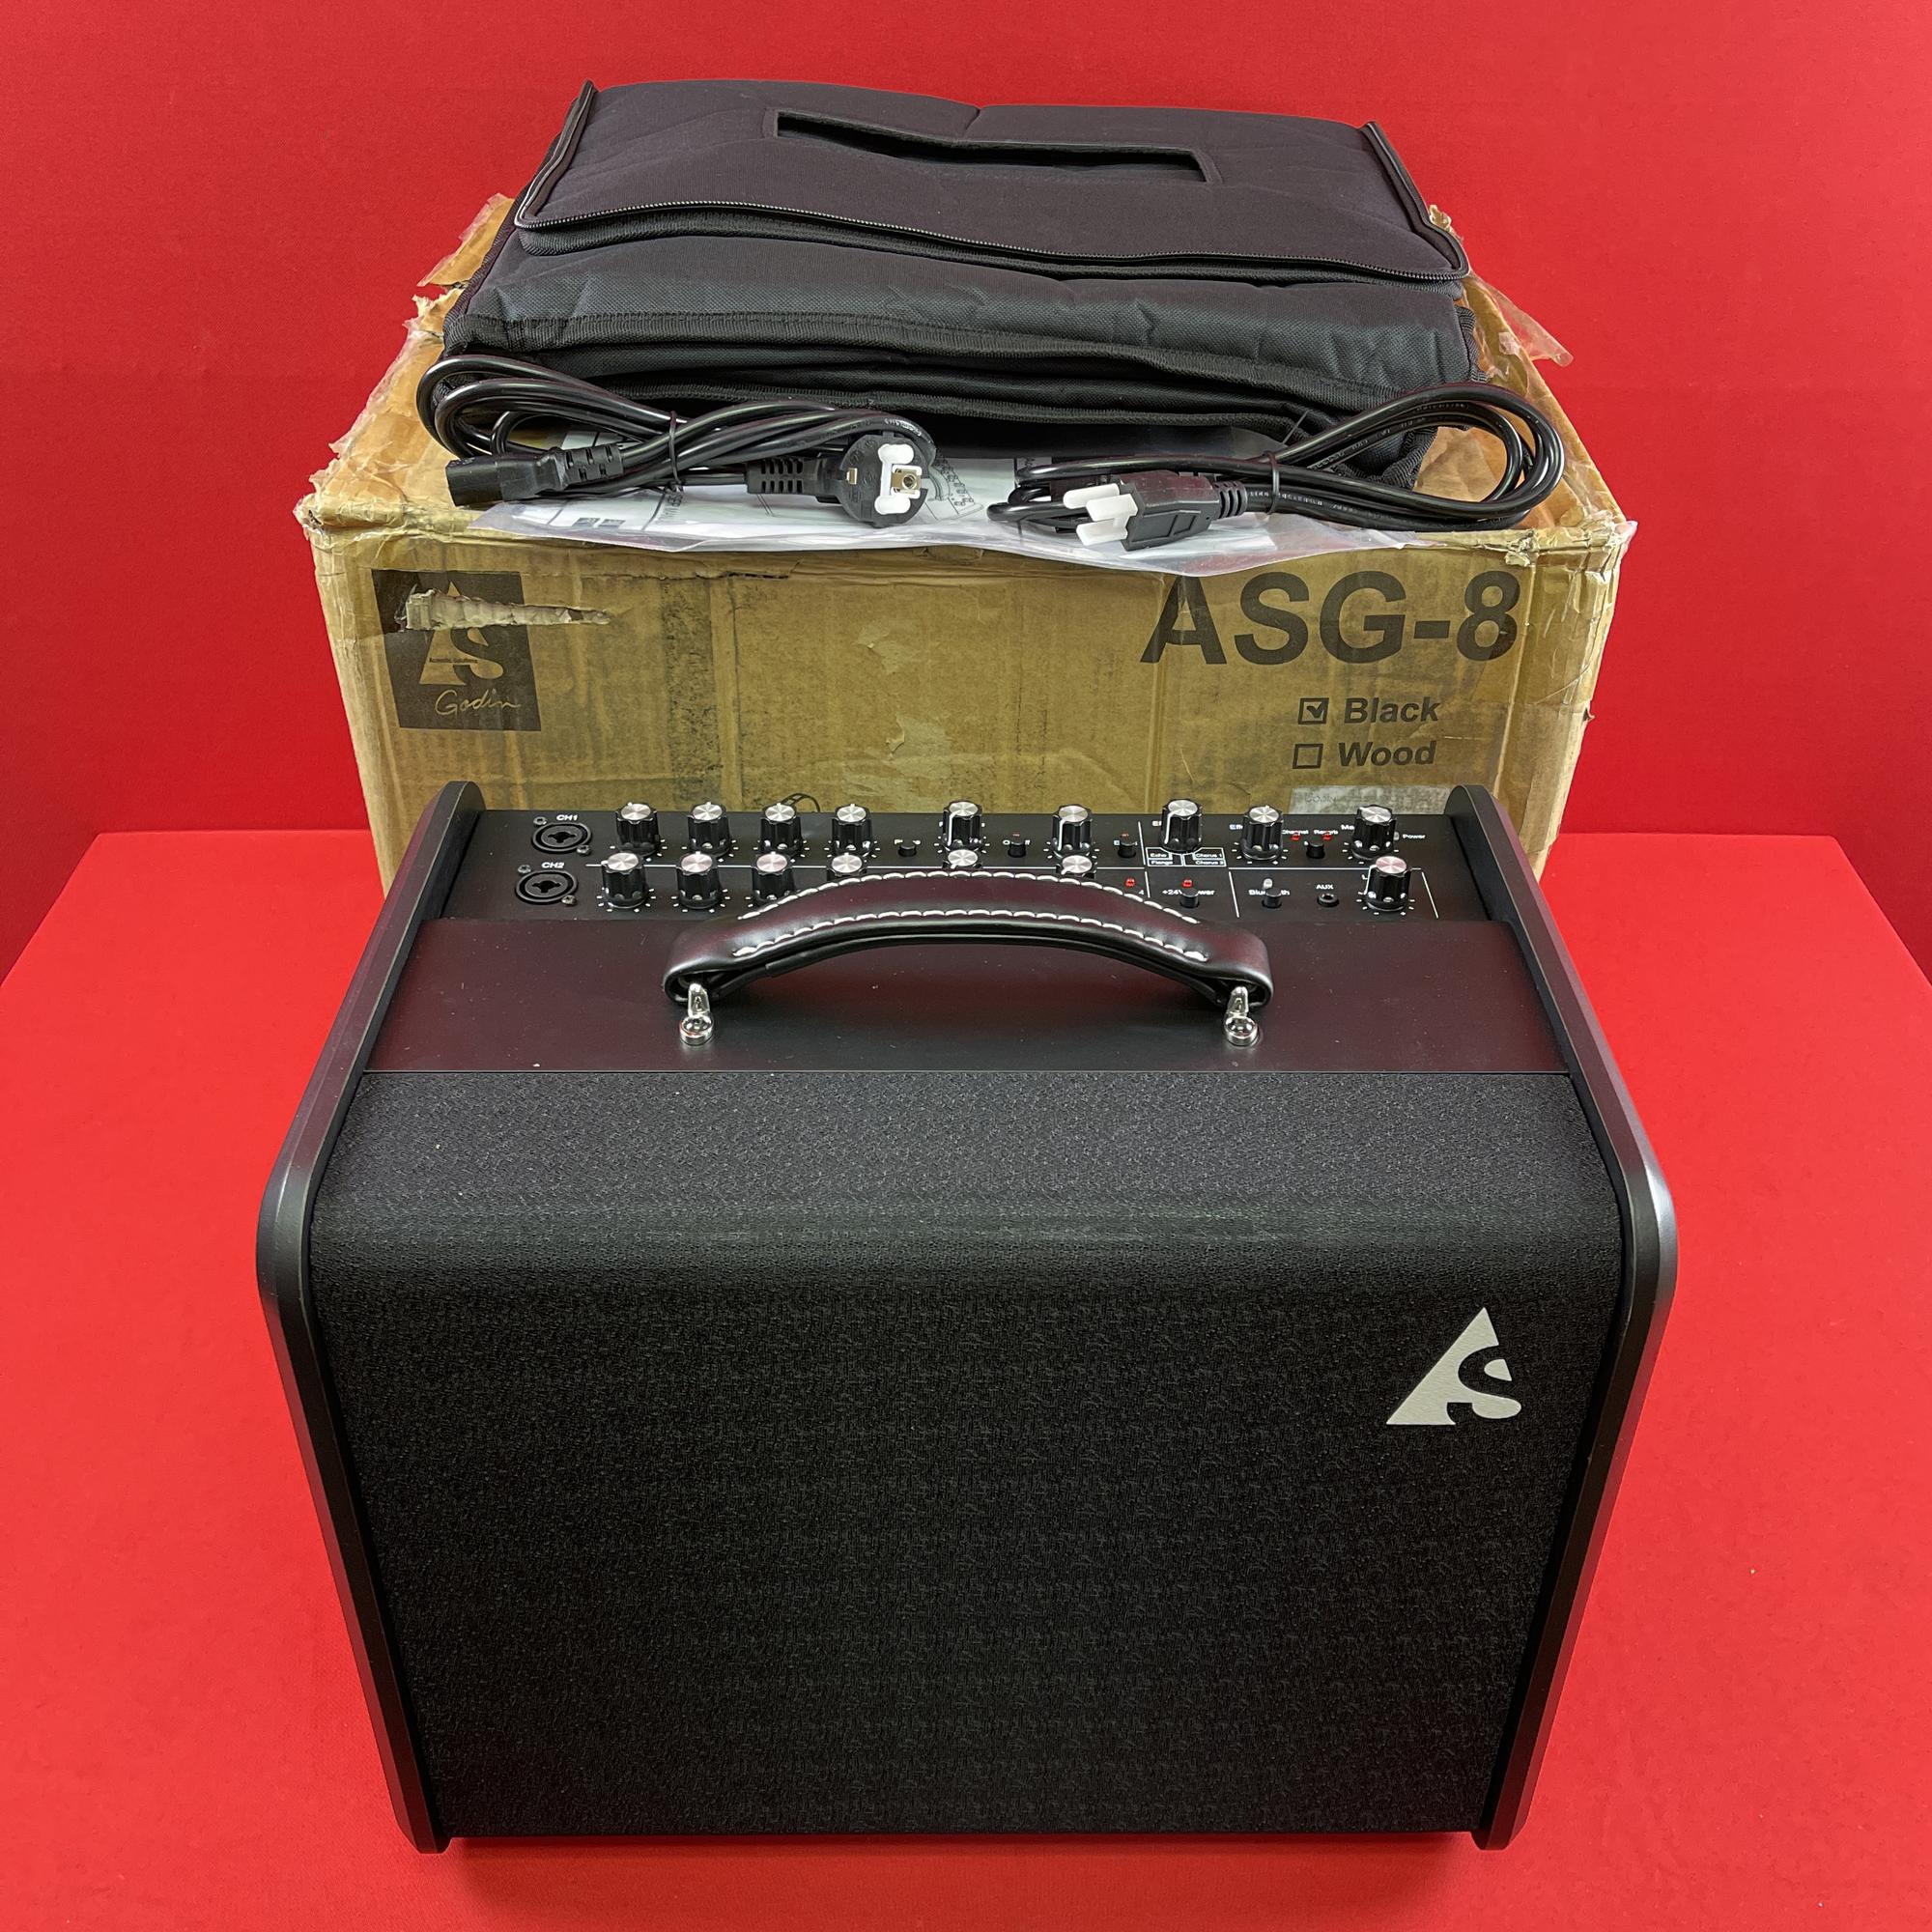 [USED] Godin ASG-8 Acoustic Solutions Acoustic Guitar Amplifier, Black 120